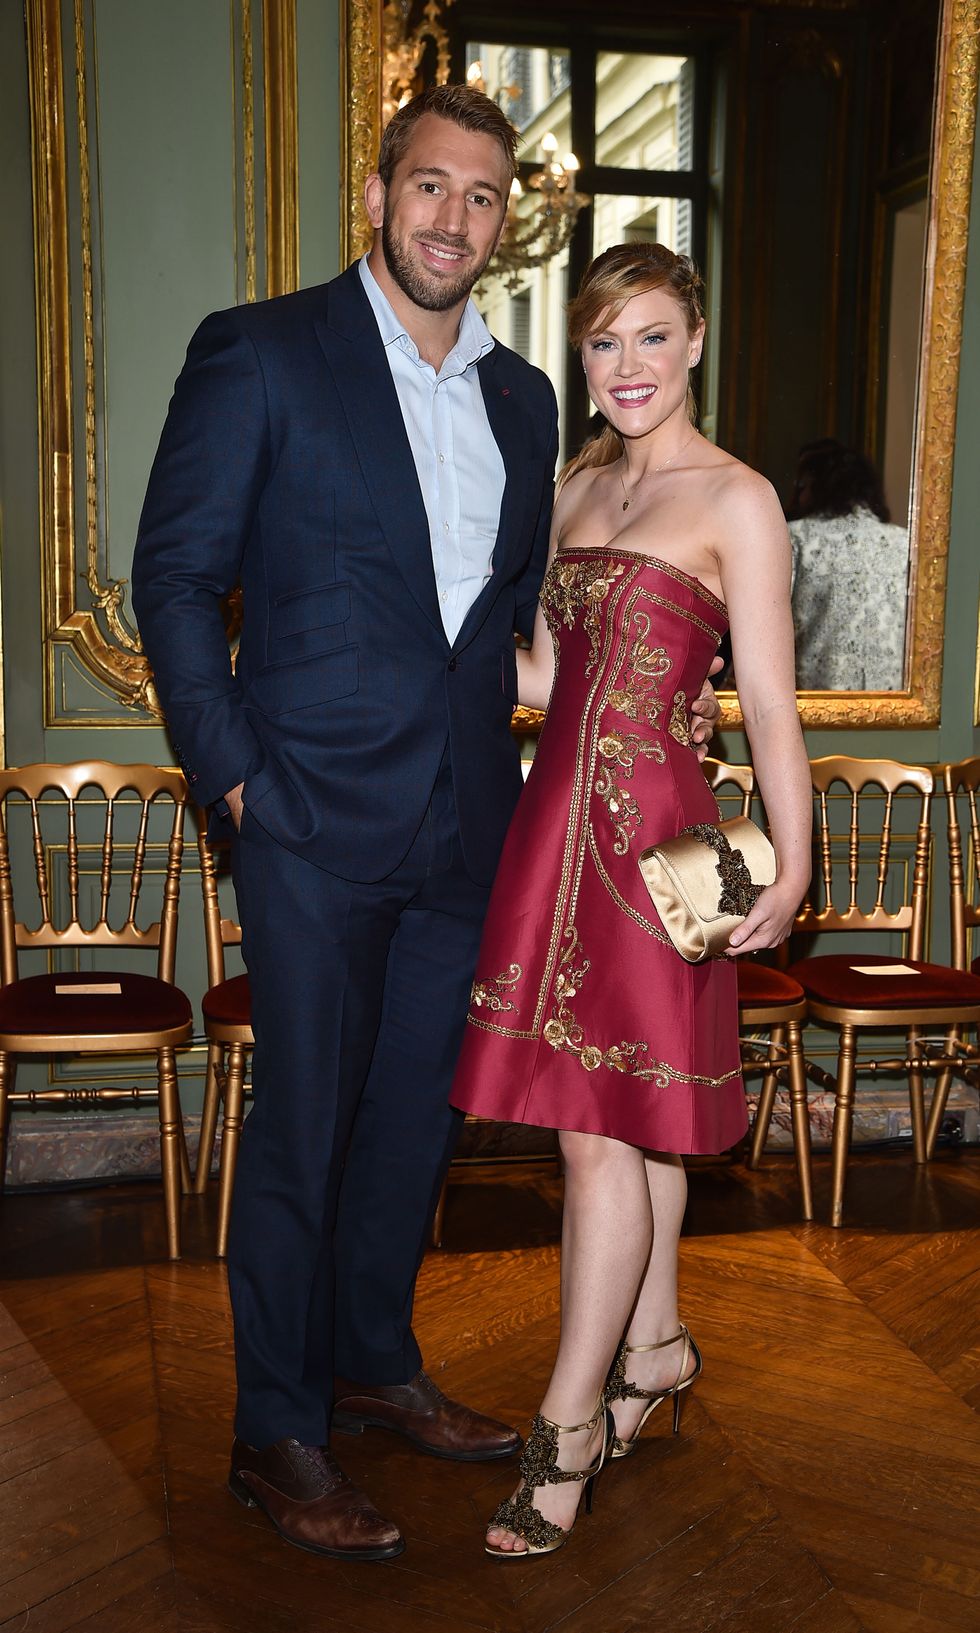 Camilla Kerslake and Chris Robshaw at the Alberta Ferretti Couture show